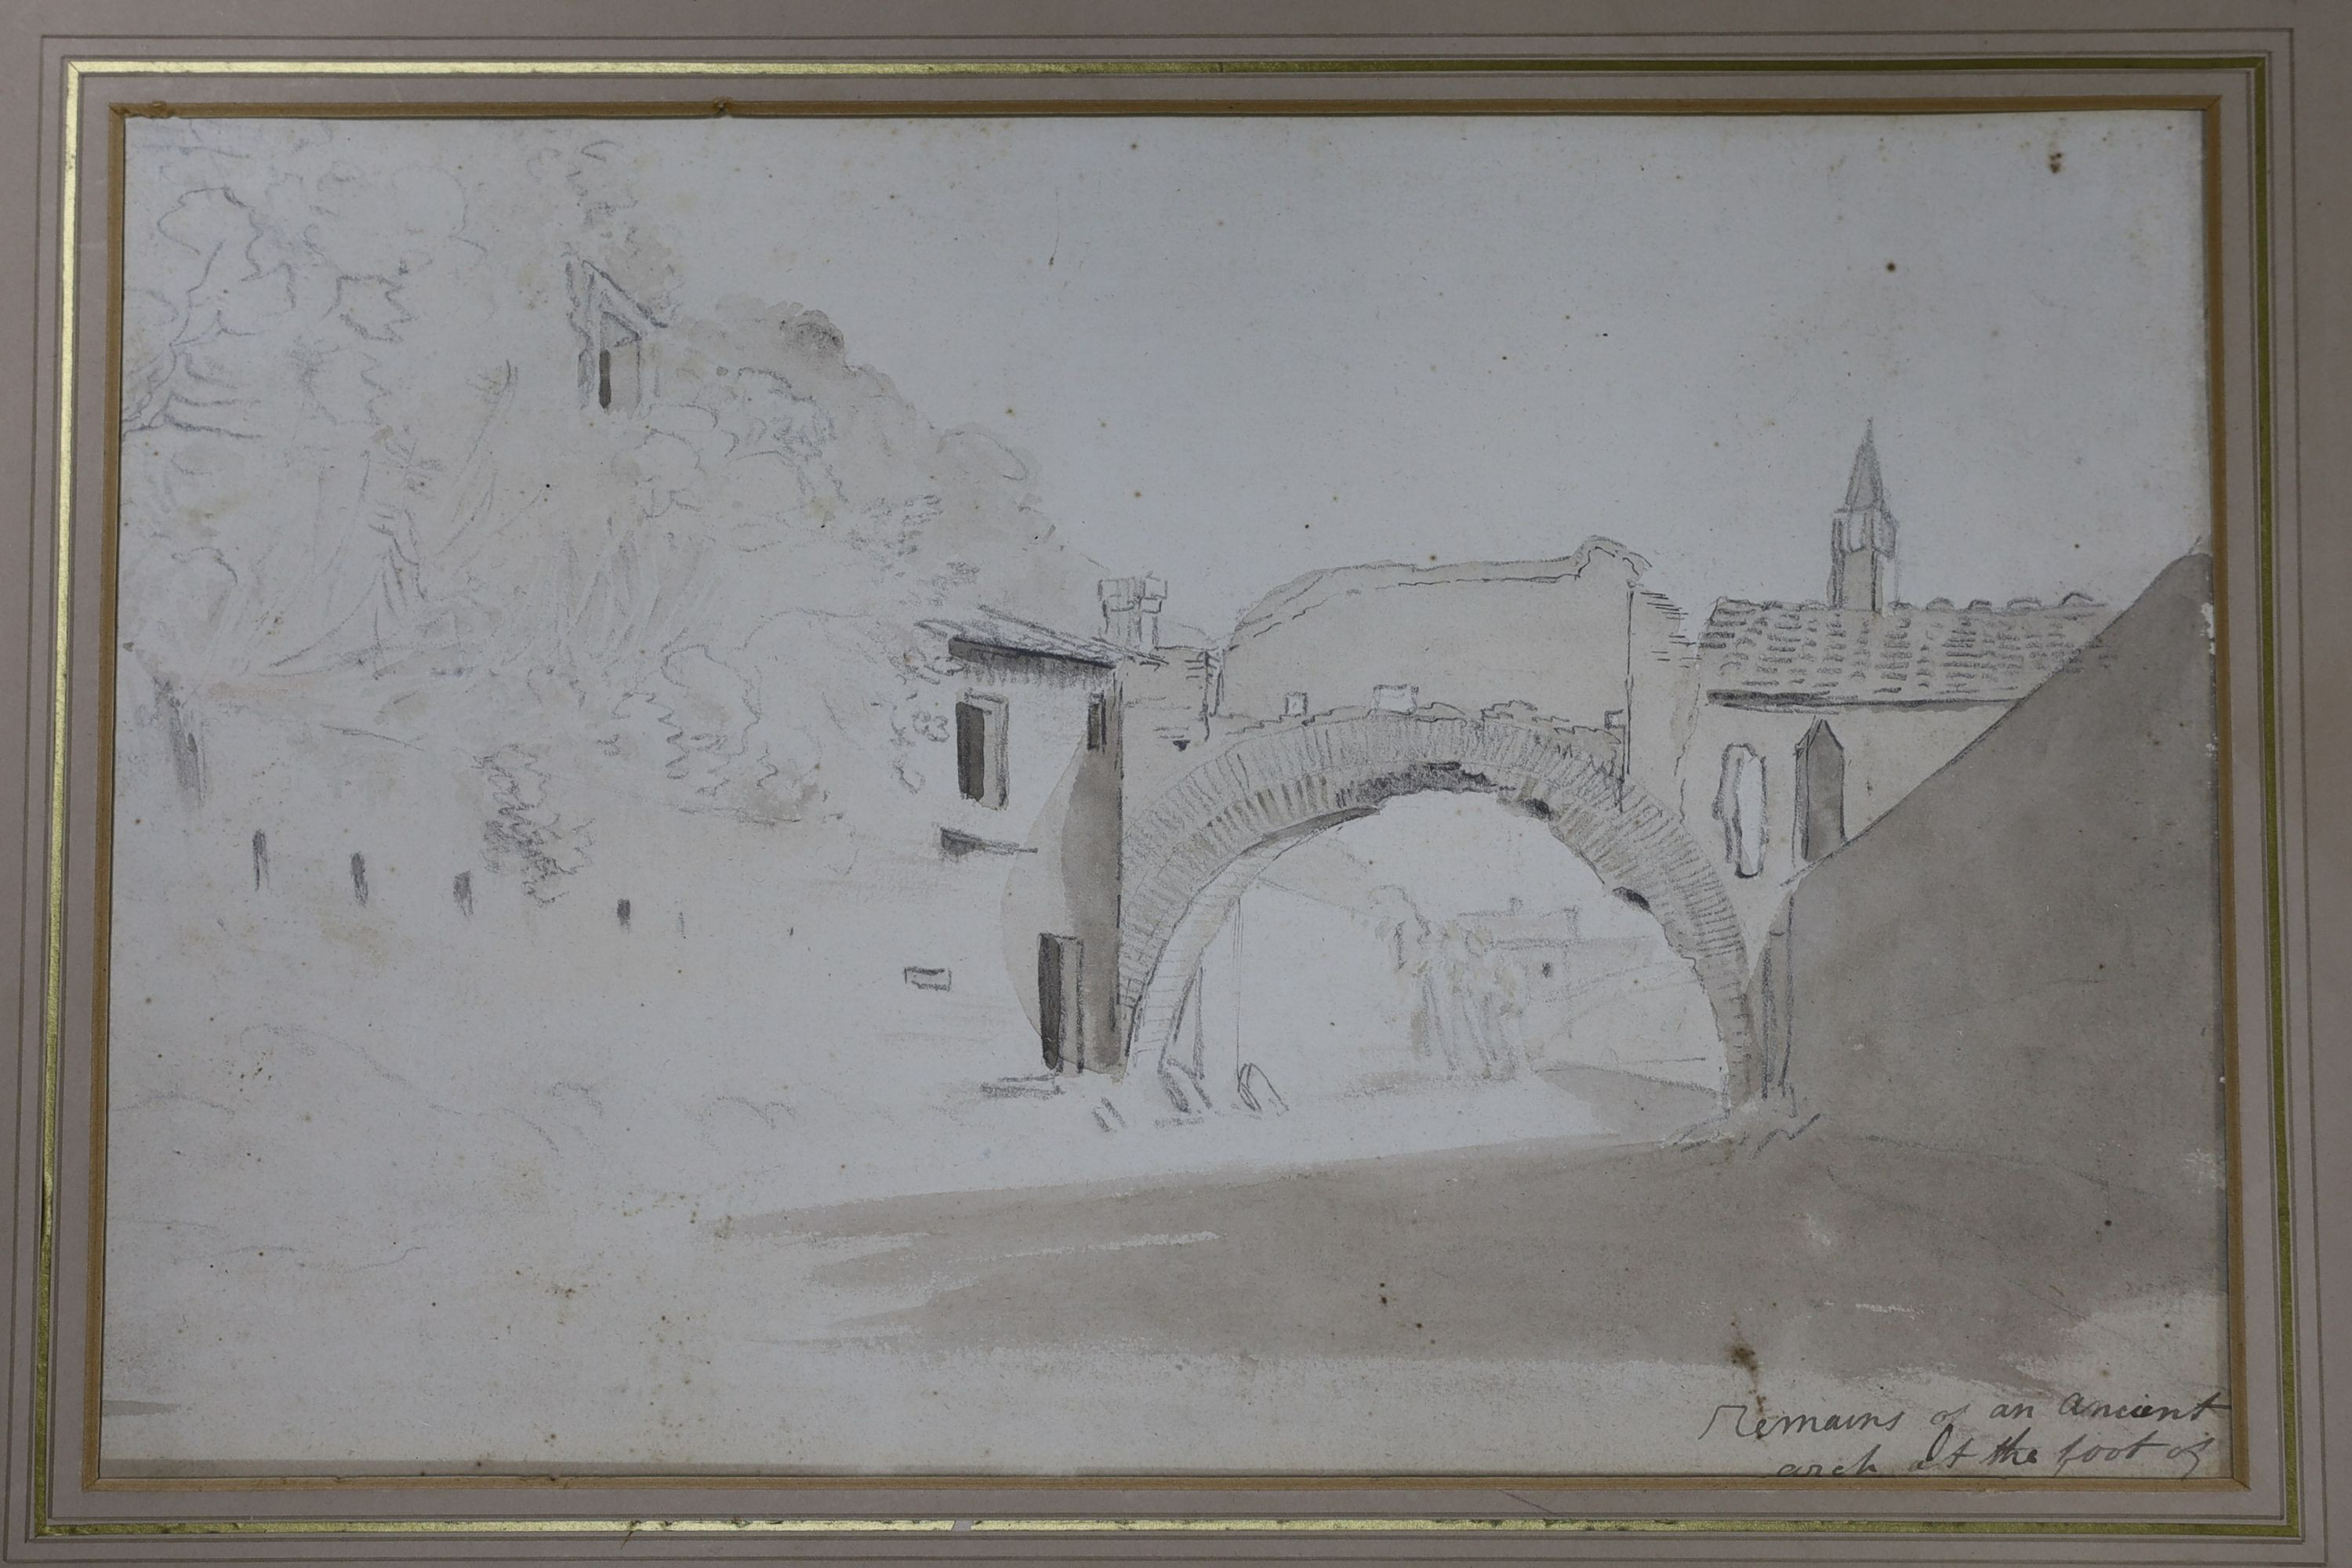 John Christian Schetky (1778-1874) pencil and watercolour, 'Remains of an ancient arch at the foot of the Aventine Hill’ 26x37.5cm